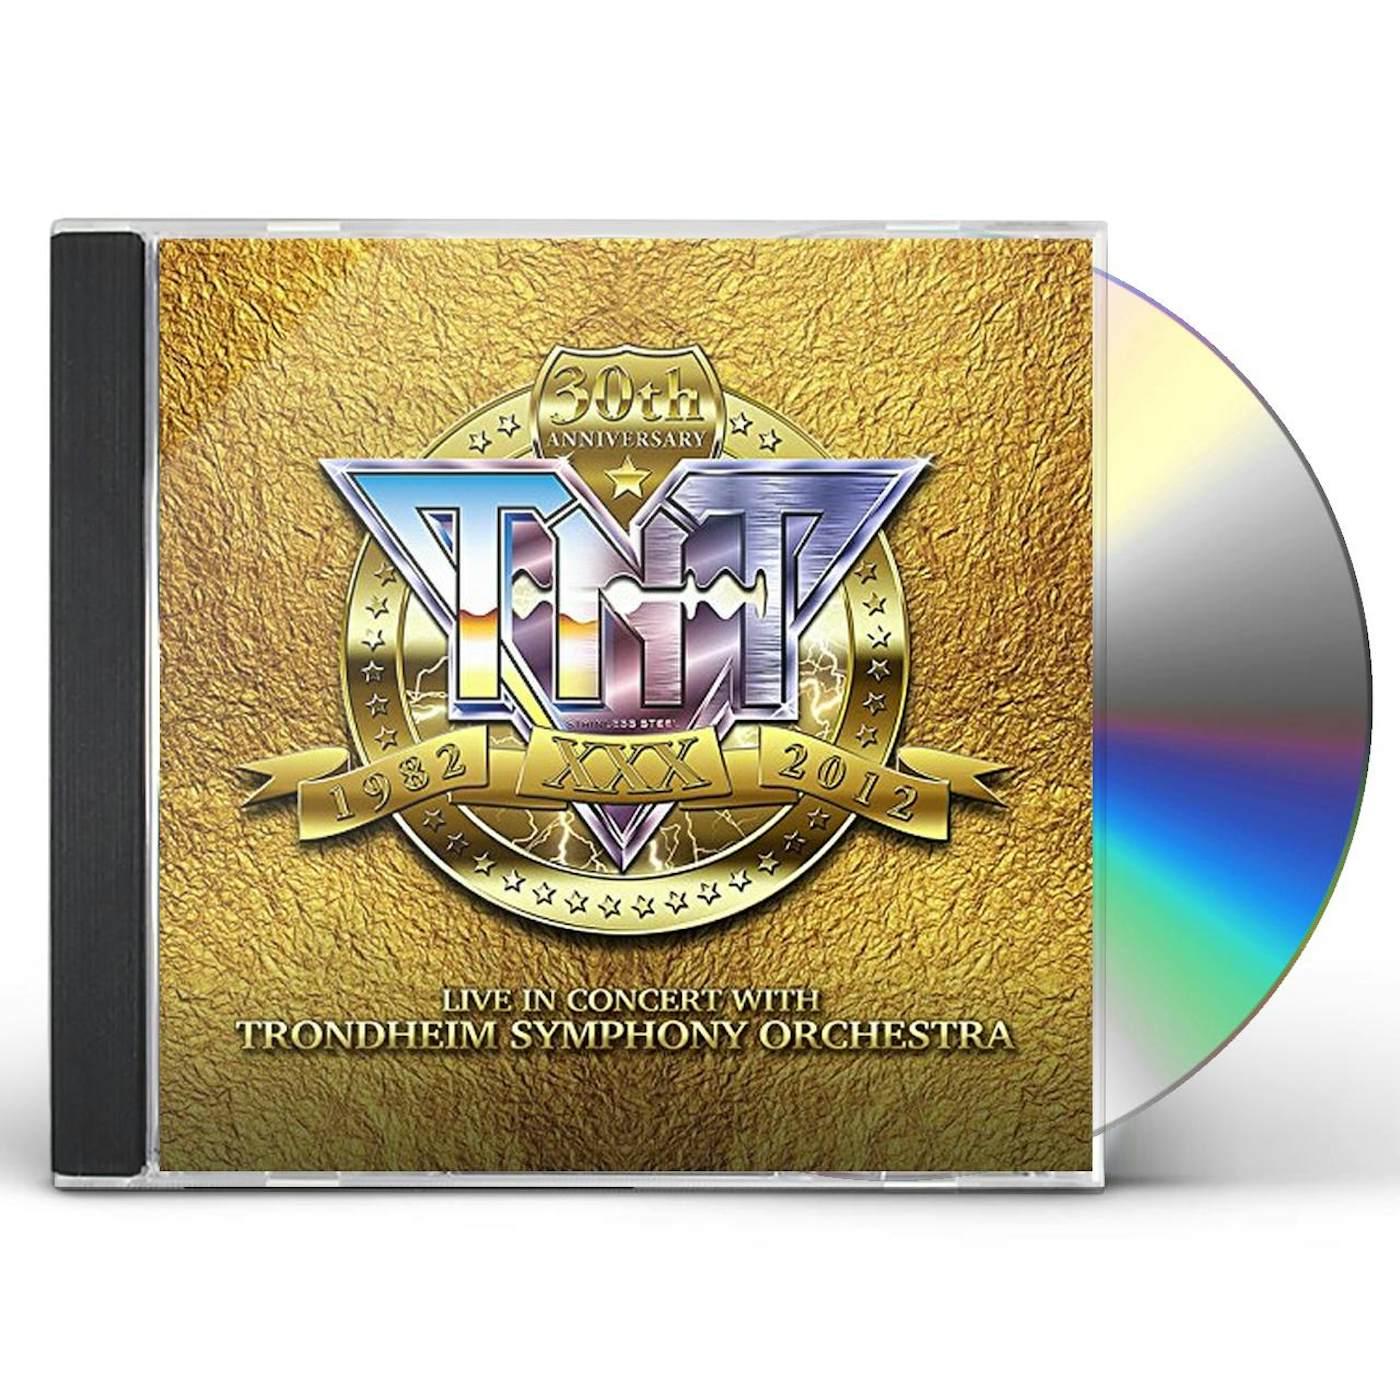 TNT 30TH ANNIVERSARY 1982-2012 LIVE IN CONCERT CD